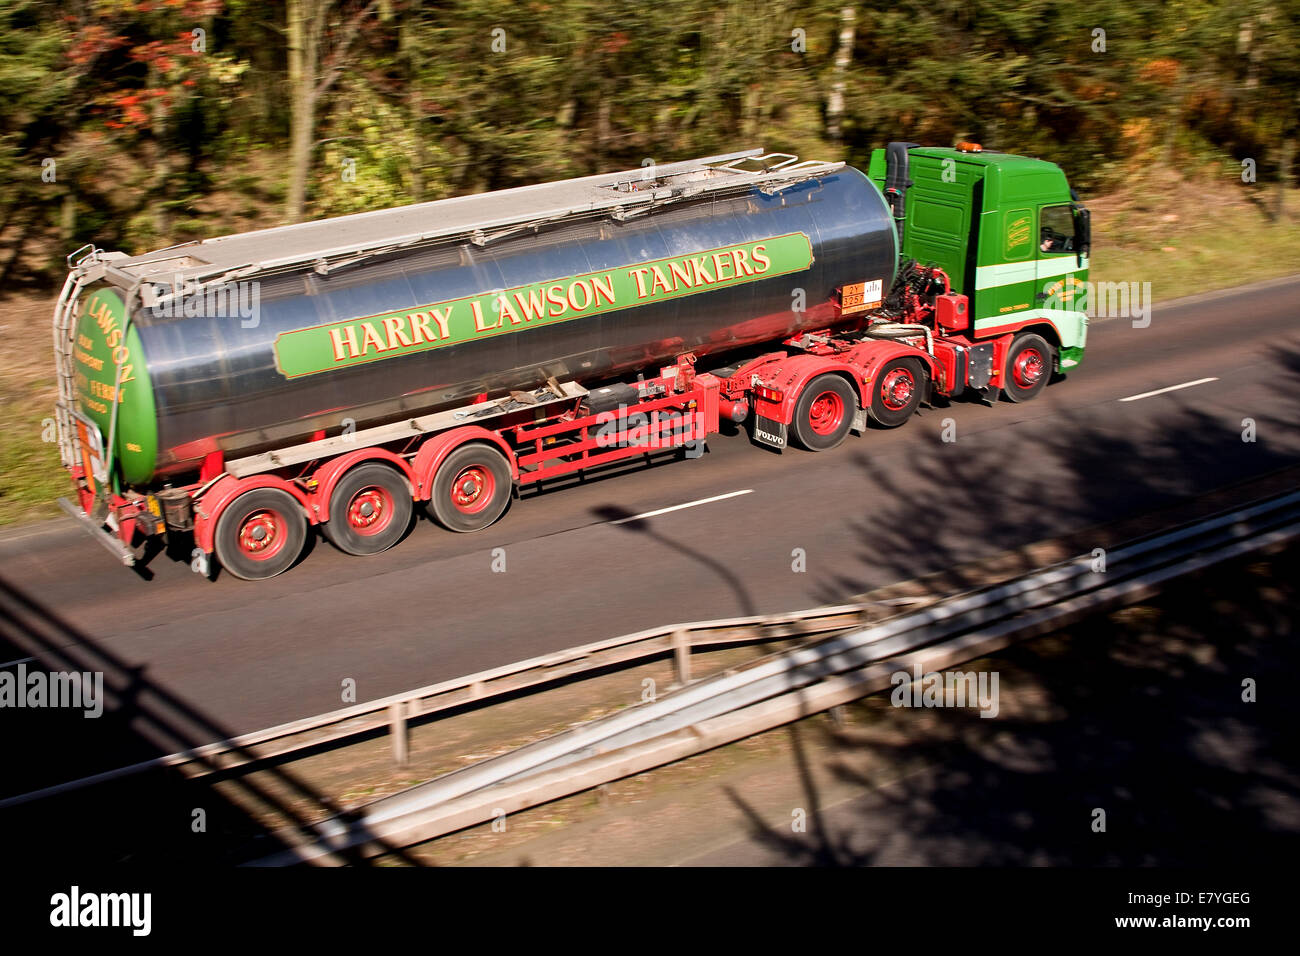 Panning with rear sync flash a Harry Lawson Fuel Tanker from the Kingsway West Dual Carriageway Flyover in Dundee, UK Stock Photo